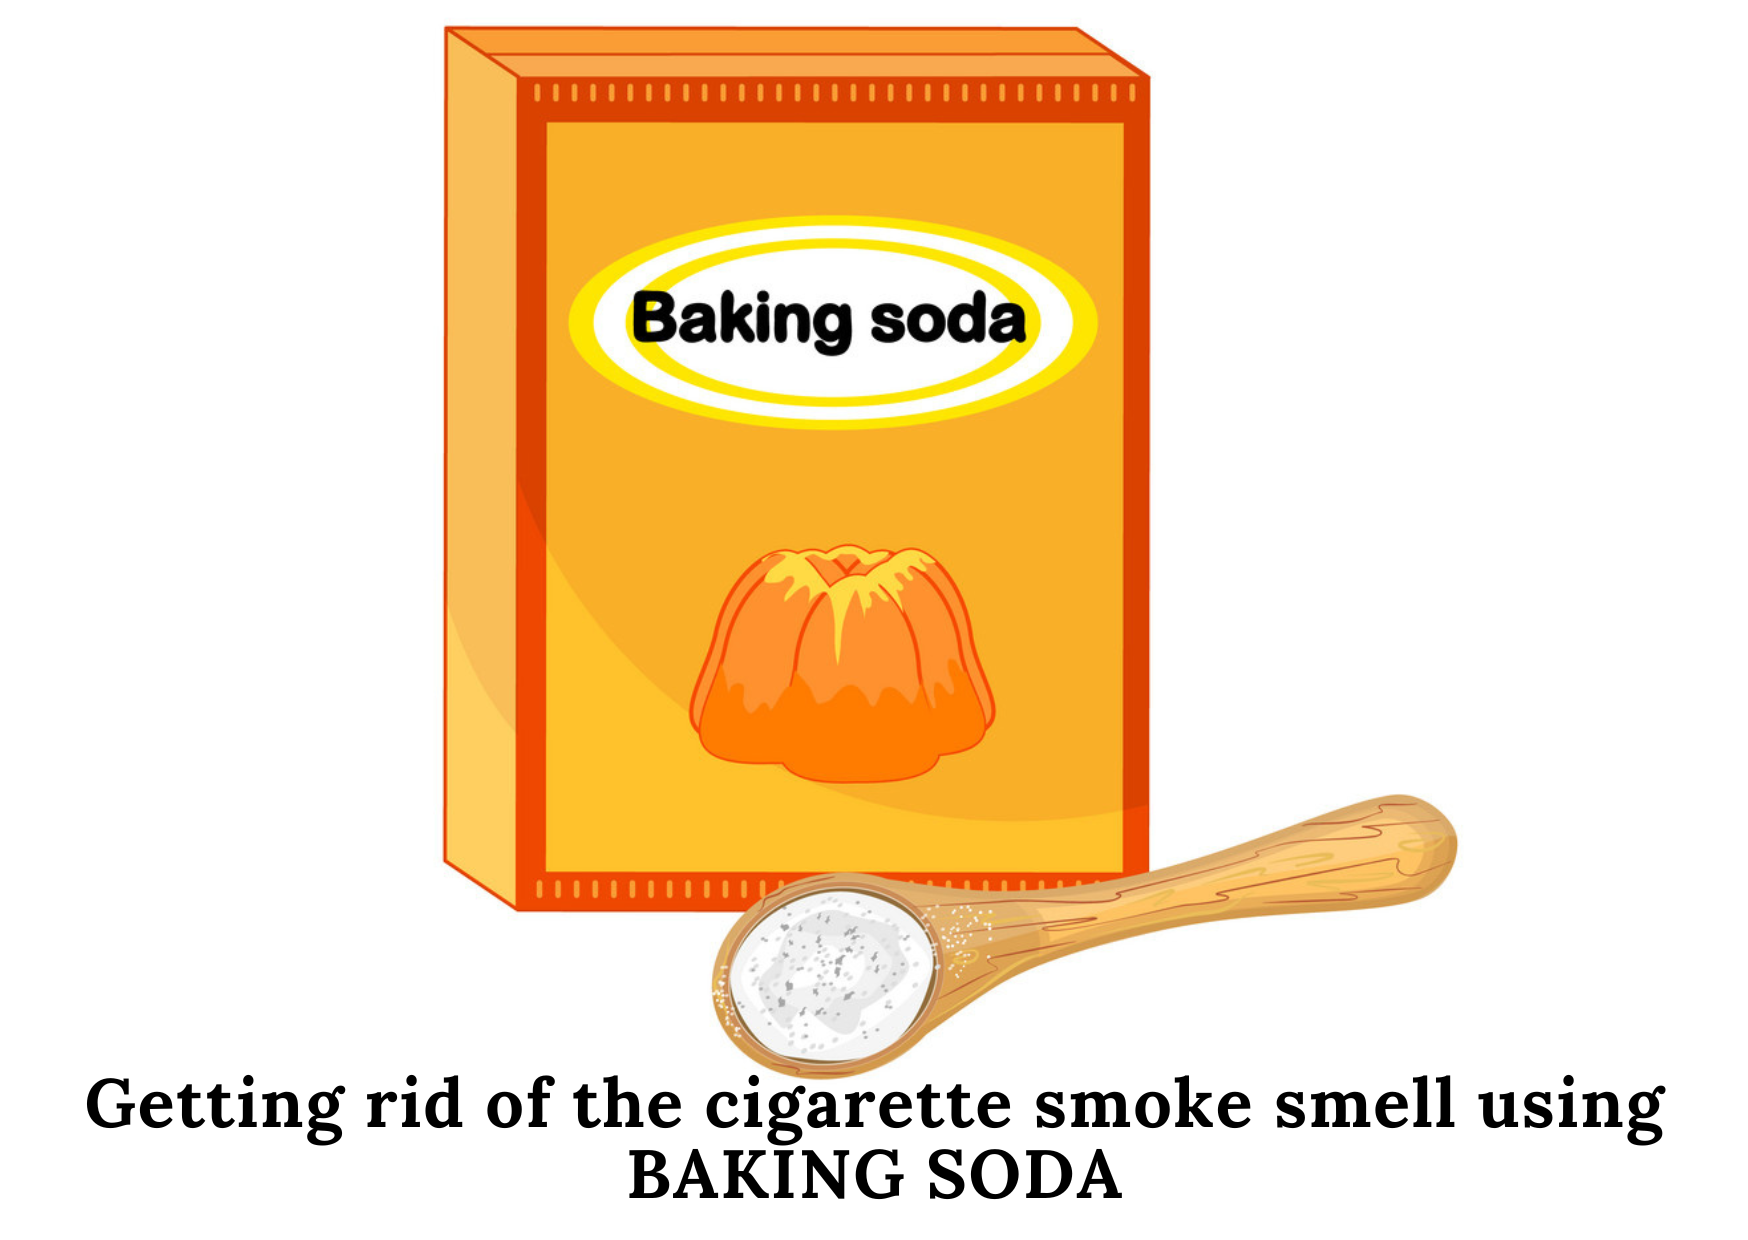 3. Getting rid of the cigarette smoke smell using baking soda